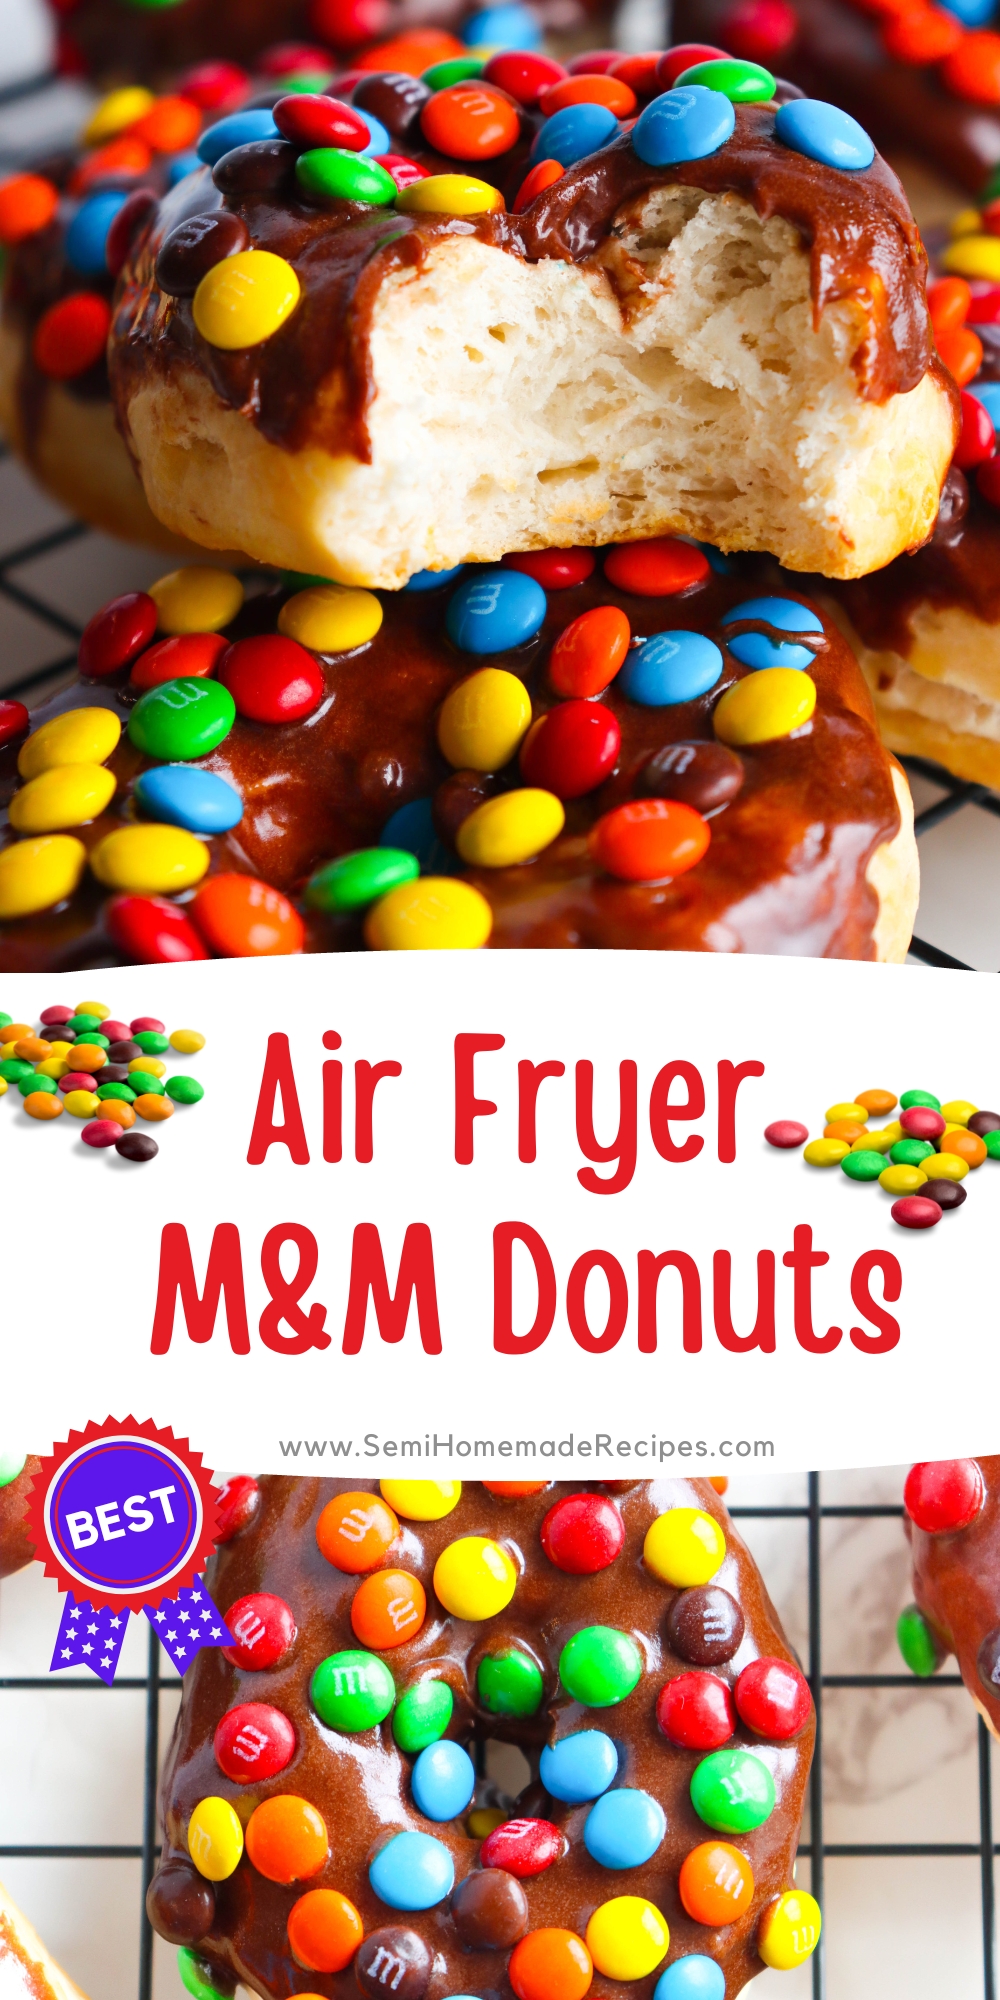 These Air Fryer M&M Donuts are fun to make and decorate with the kids! An easy and simple treat that just takes minutes to create! 